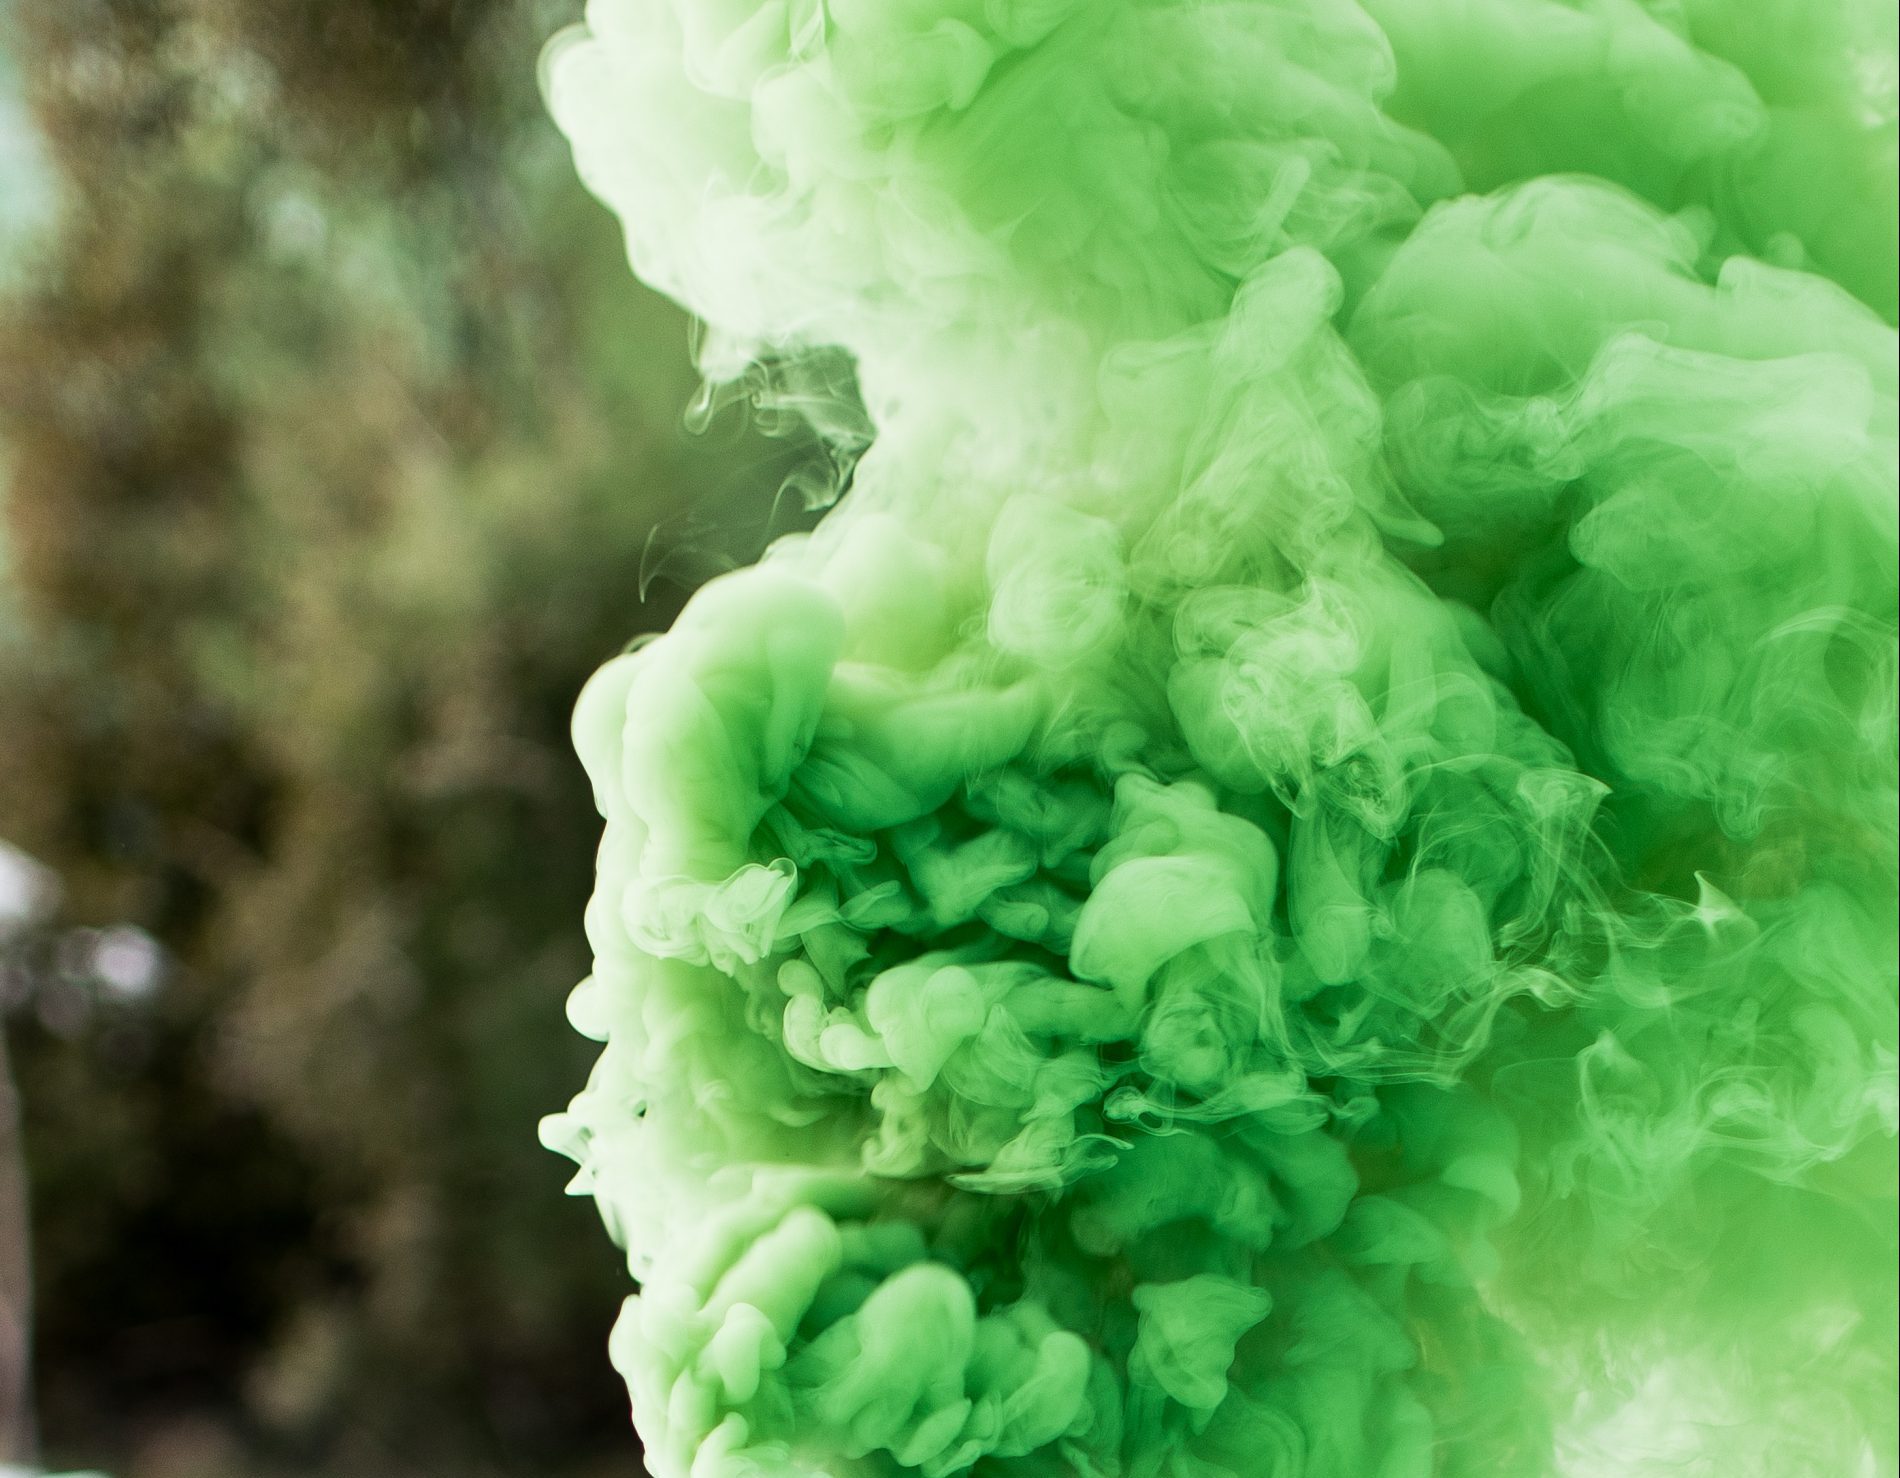 shallow focus photography of canister producing green smoke